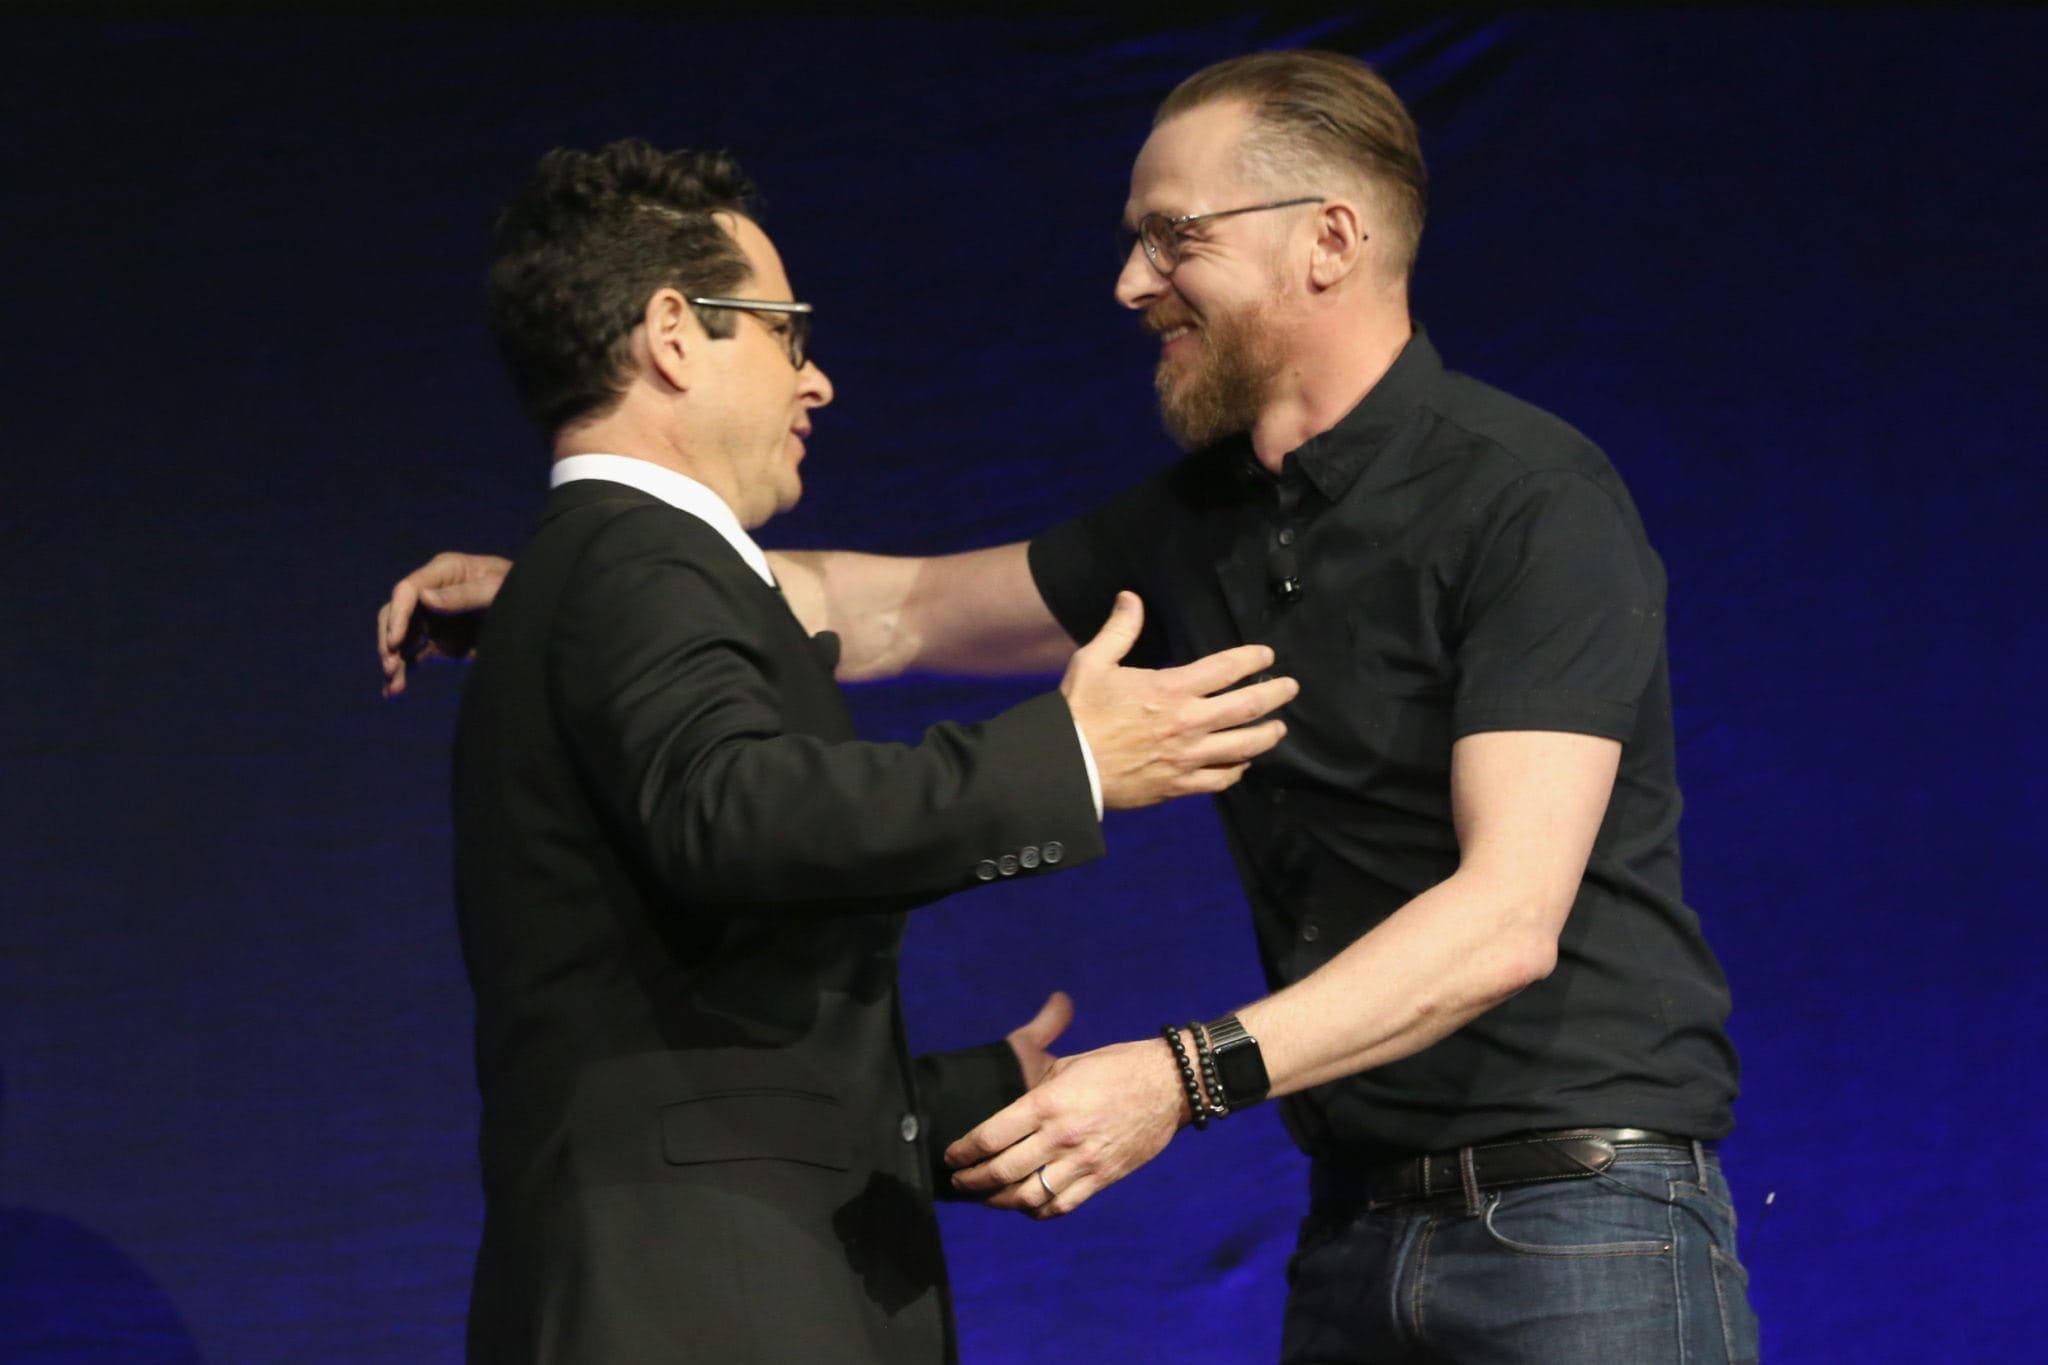 LAS VEGAS, NV - APRIL 11: Director J.J. Abrams (L) and actor Simon Pegg speak onstage during the CinemaCon 2016 Gala Opening Night Event: Paramount Pictures Highlights its 2016 Summer and Beyond Films at The Colosseum at Caesars Palace during CinemaCon, the official convention of the National Association of Theatre Owners, on April 11, 2016 in Las Vegas, Nevada. (Photo by Todd Williamson/Getty Images for CinemaCon) *** Local Caption *** J.J. Abrams;Simon Pegg